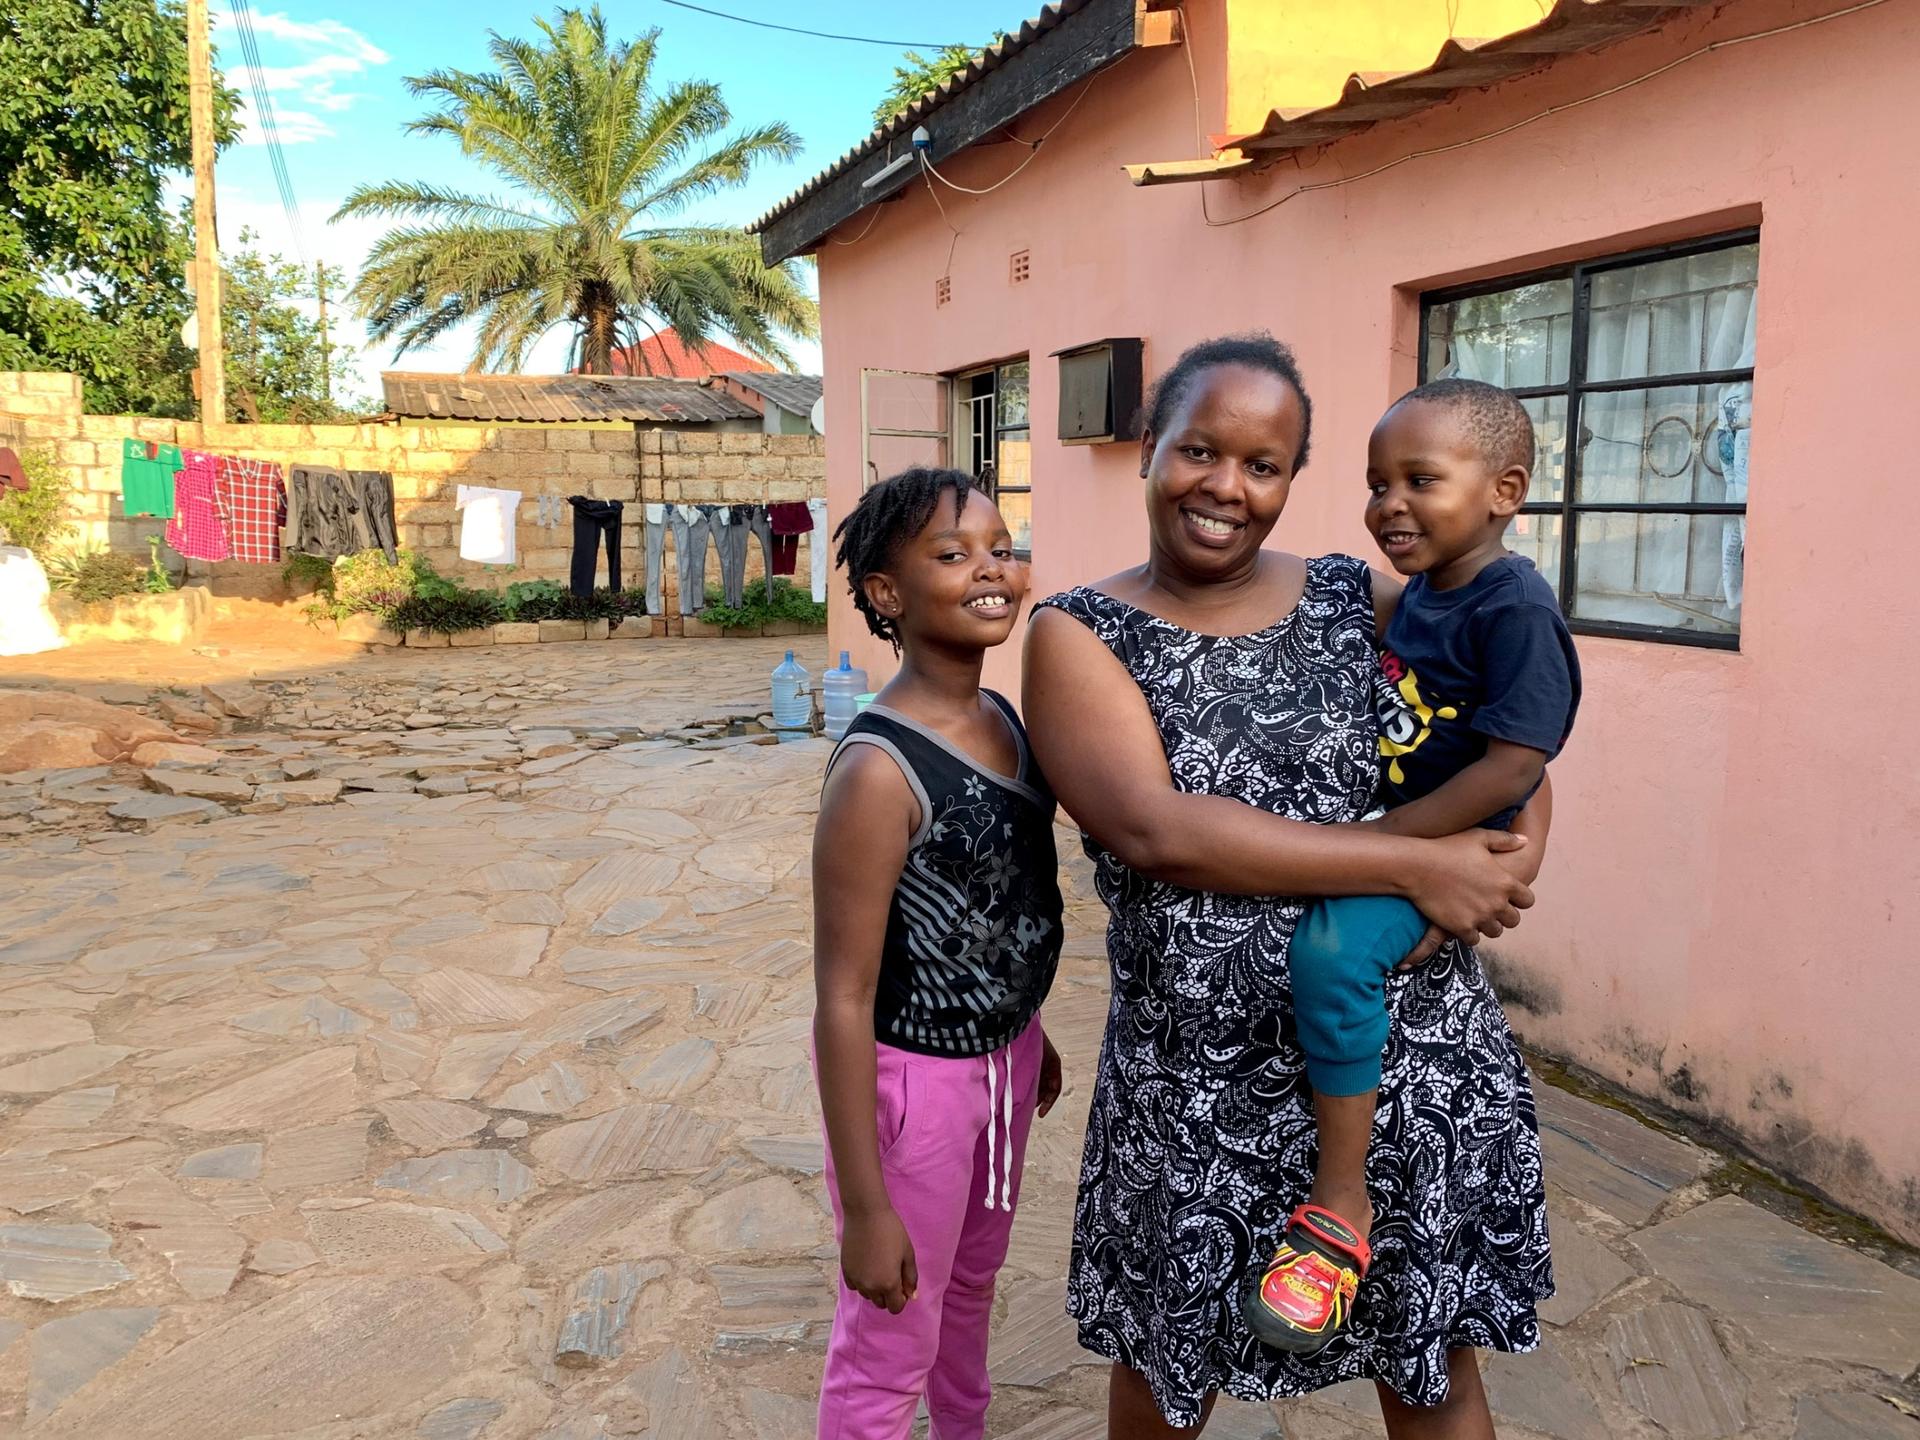 Nala Phiri was diagnosed with multiple sclerosis in 2016 after three years of unexplained symptoms. She is pictured here with her children Namila and Sangu outside of their home in Lusaka, Zambia.